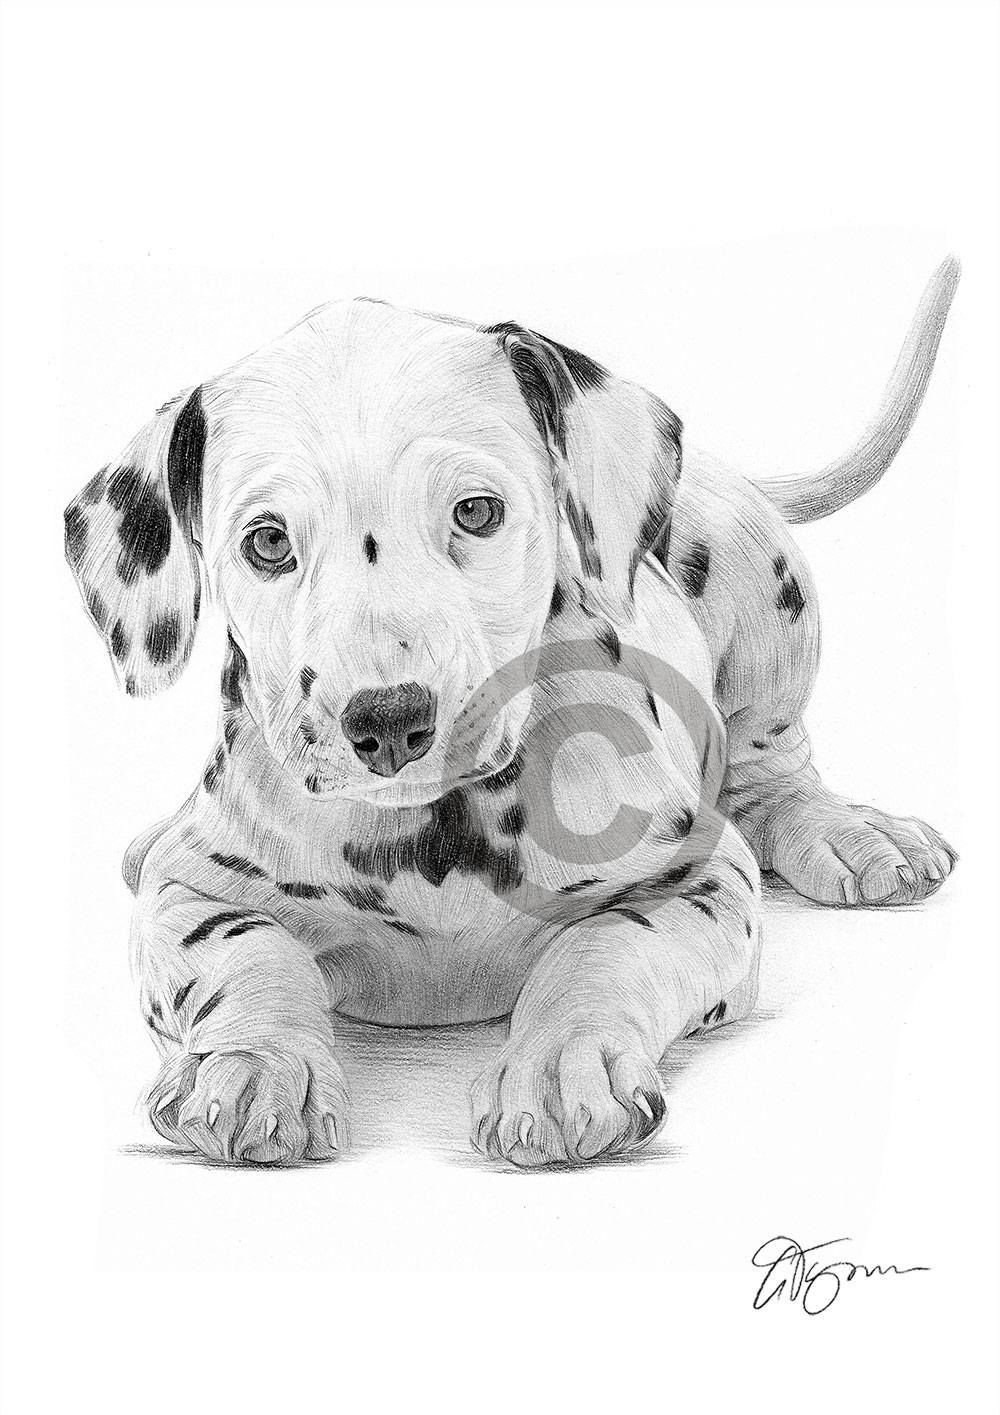 Pencil drawing of a Dalmation puppy by artist Gary Tymon